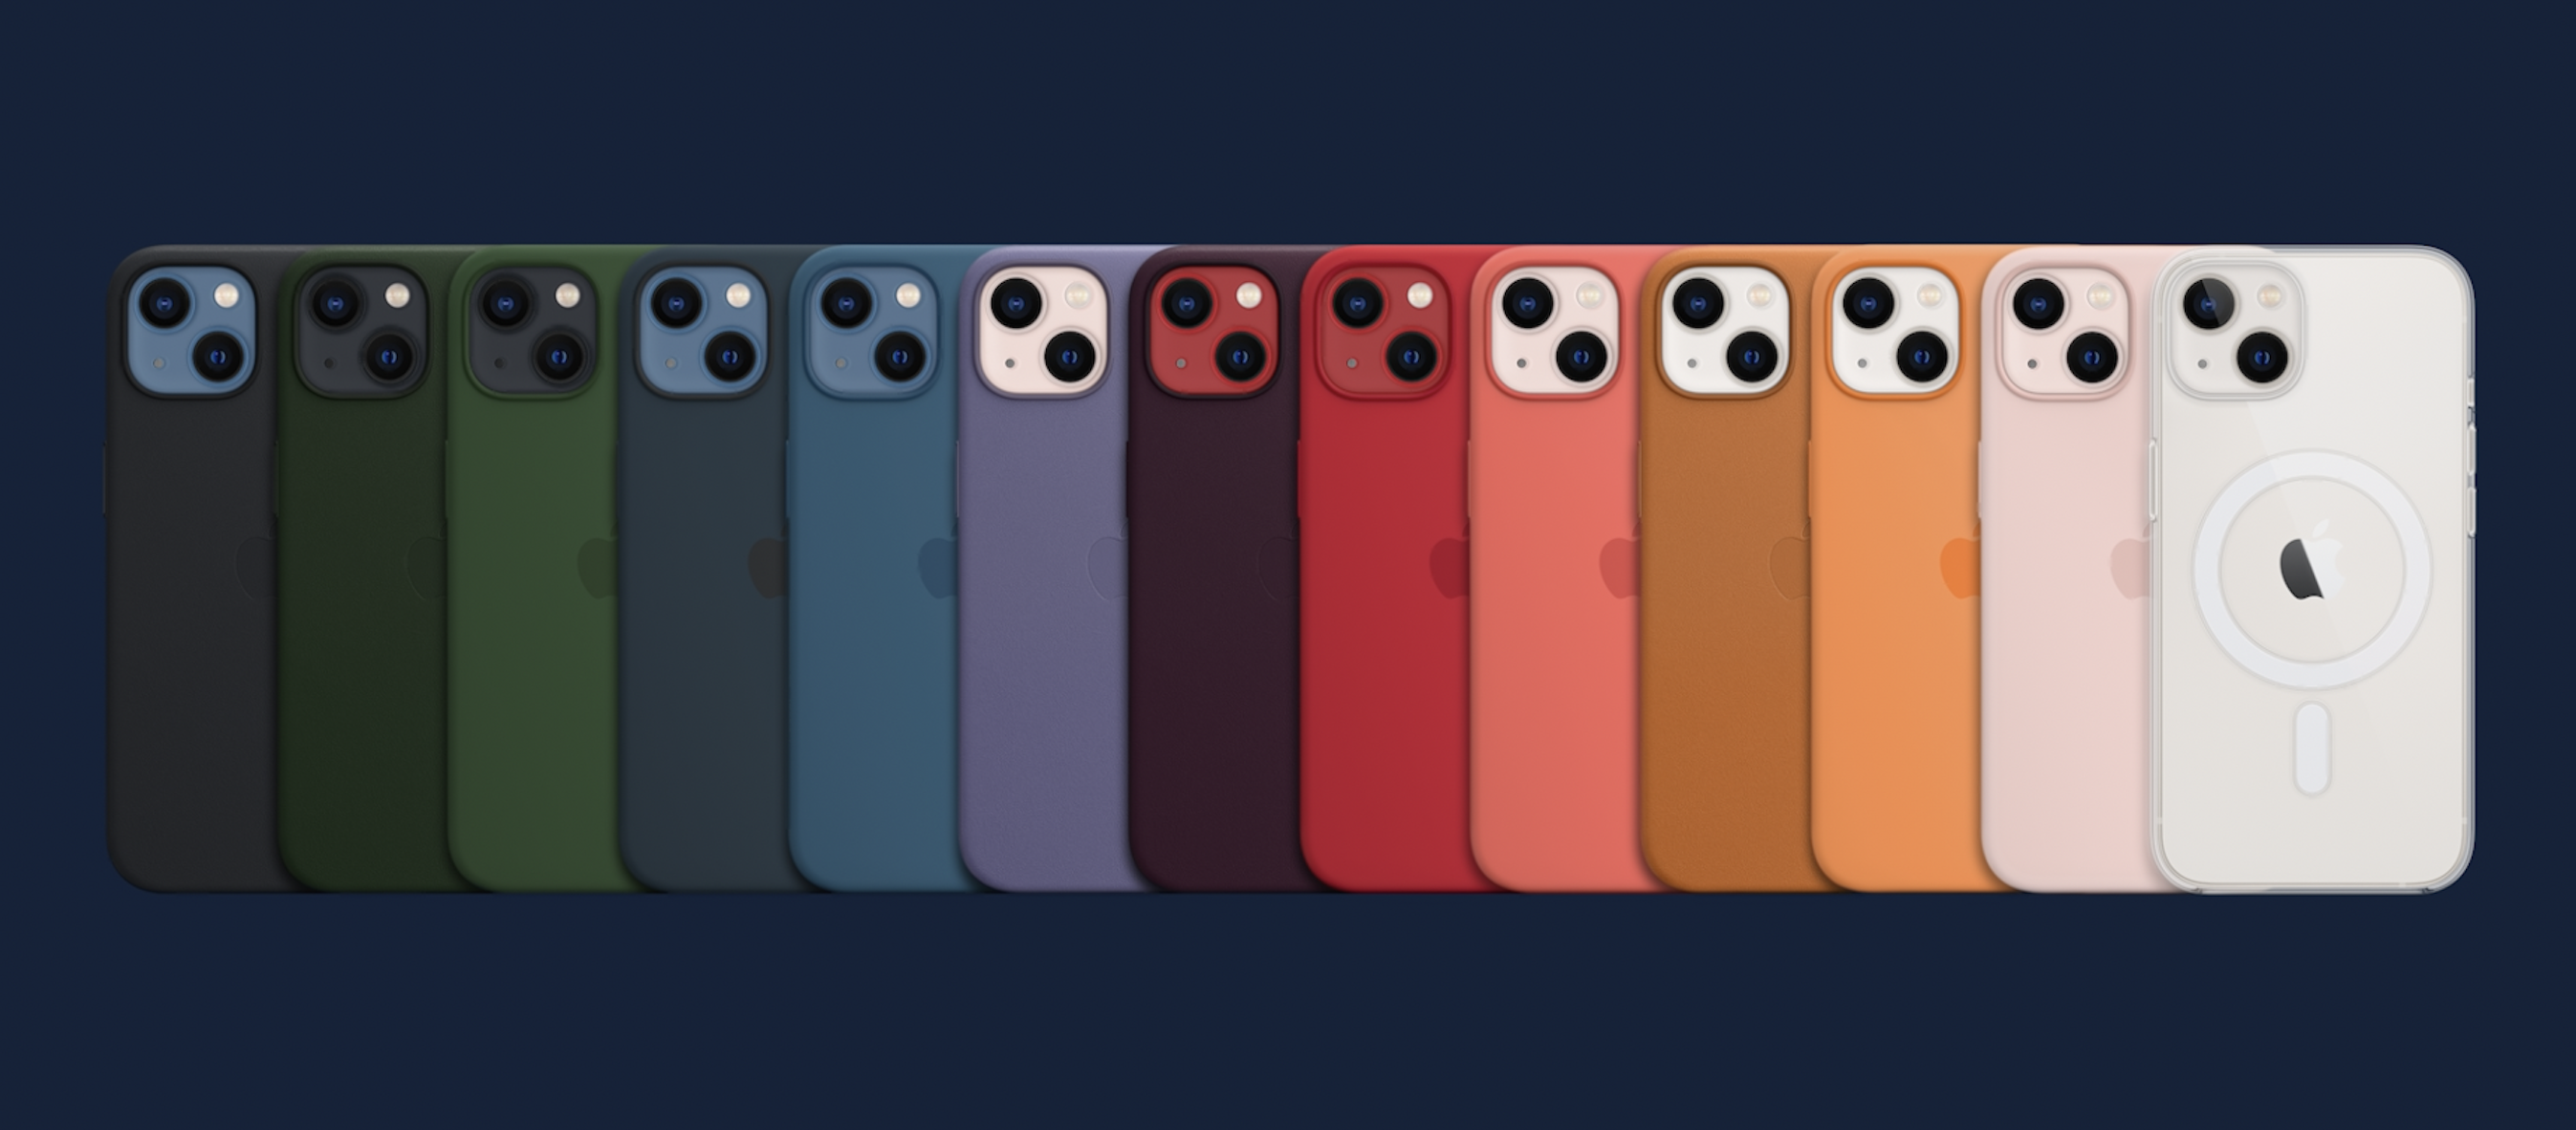 magsafe wallet colors